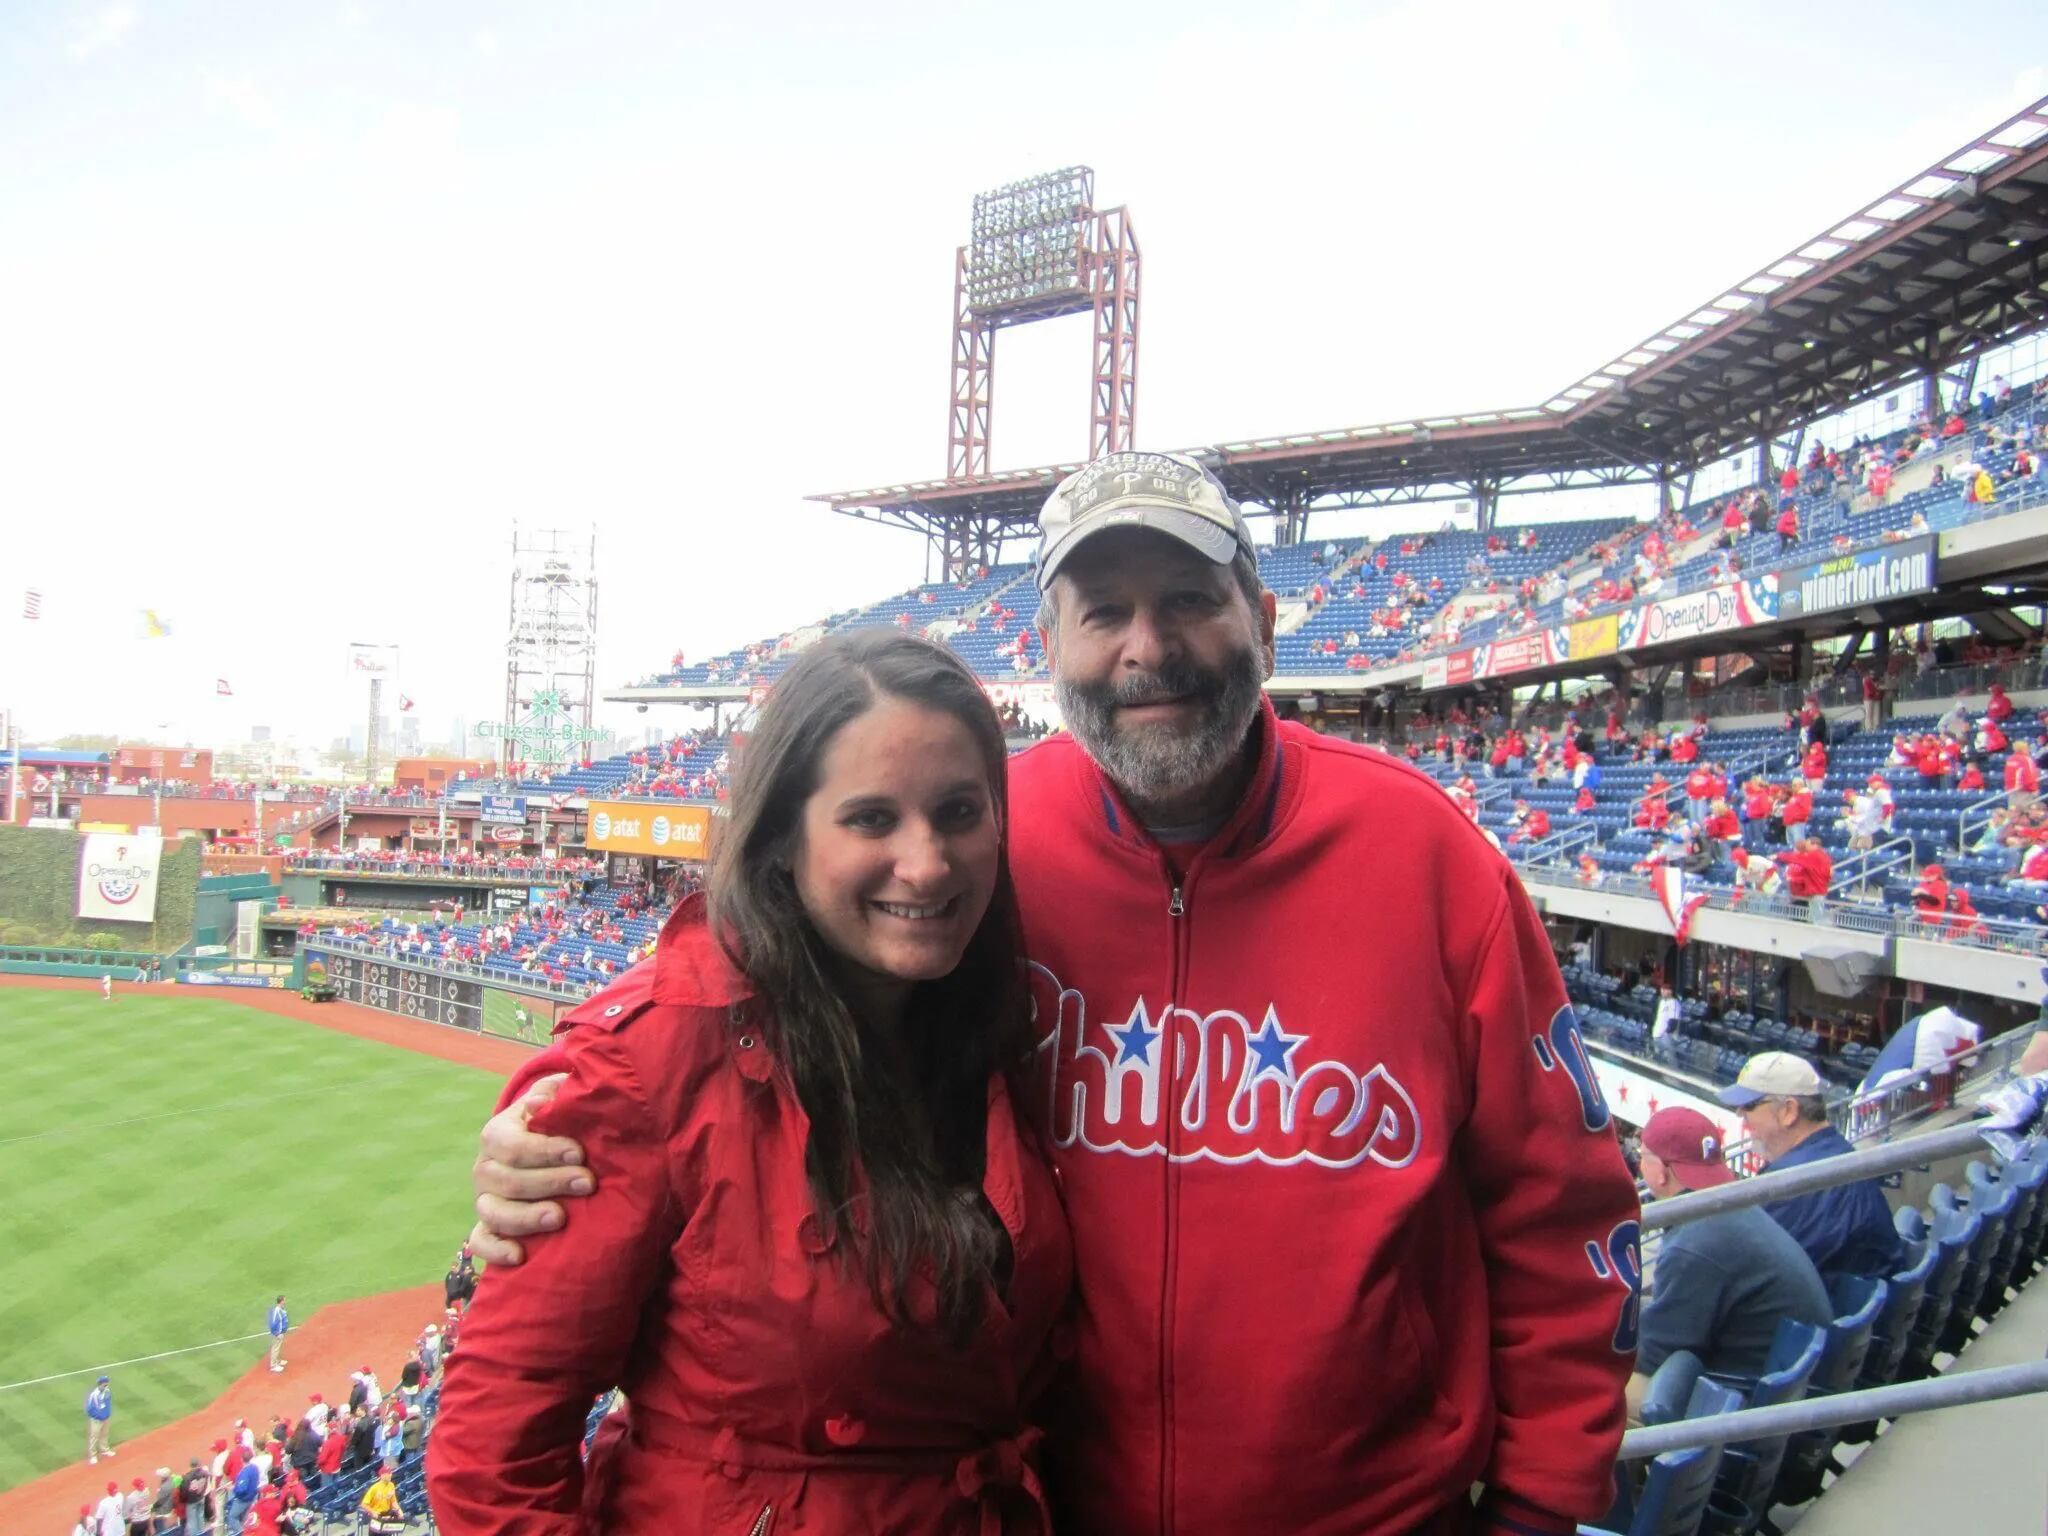 Phillies' female fans are among the most faithful – Delco Times